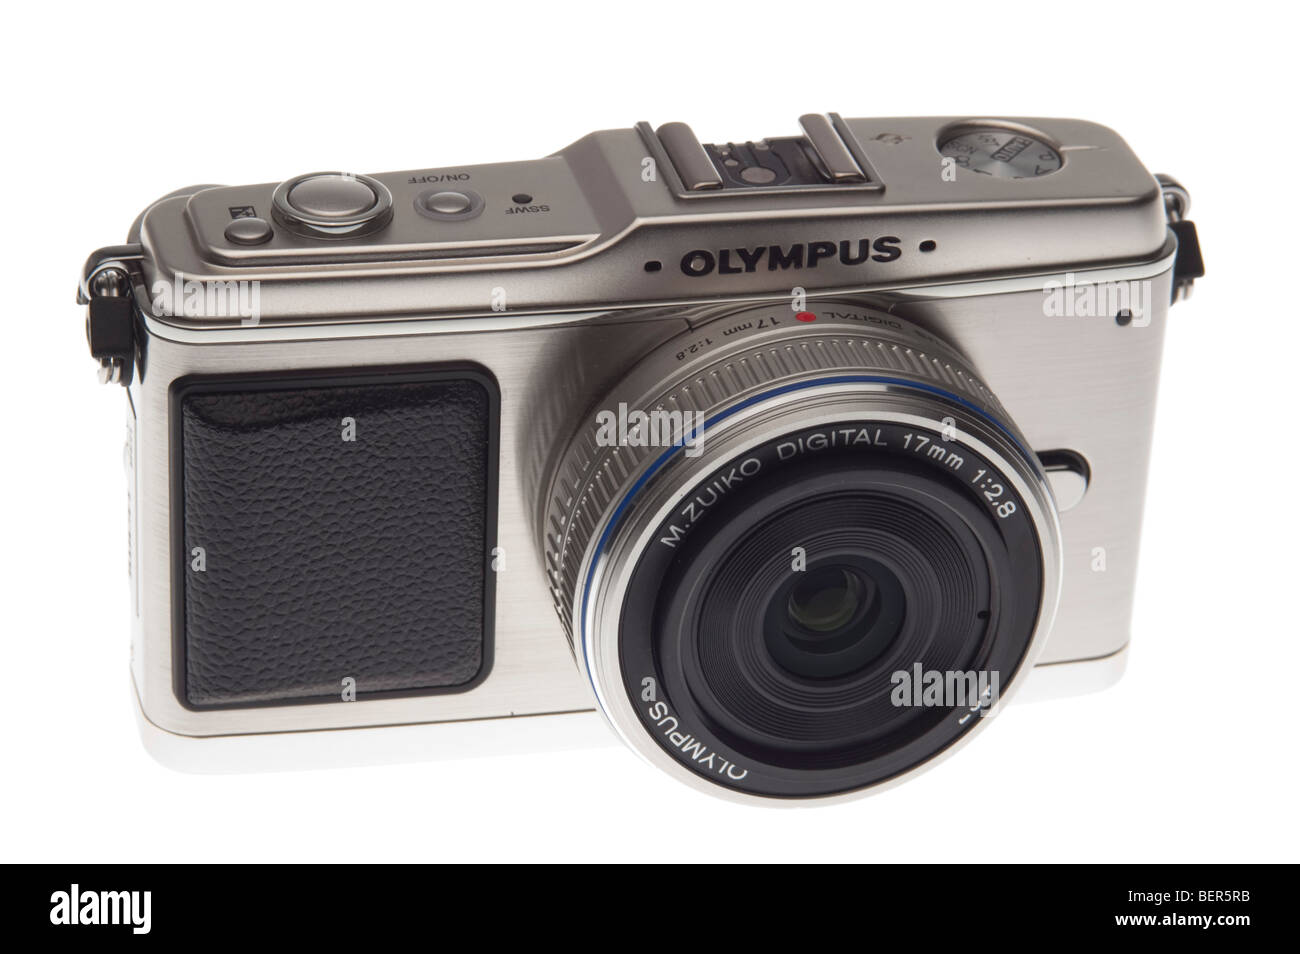 Olympus 'Pen Digital' or EP-1 FourThirds format digital camera 2009 with retro metal styling Stock Photo